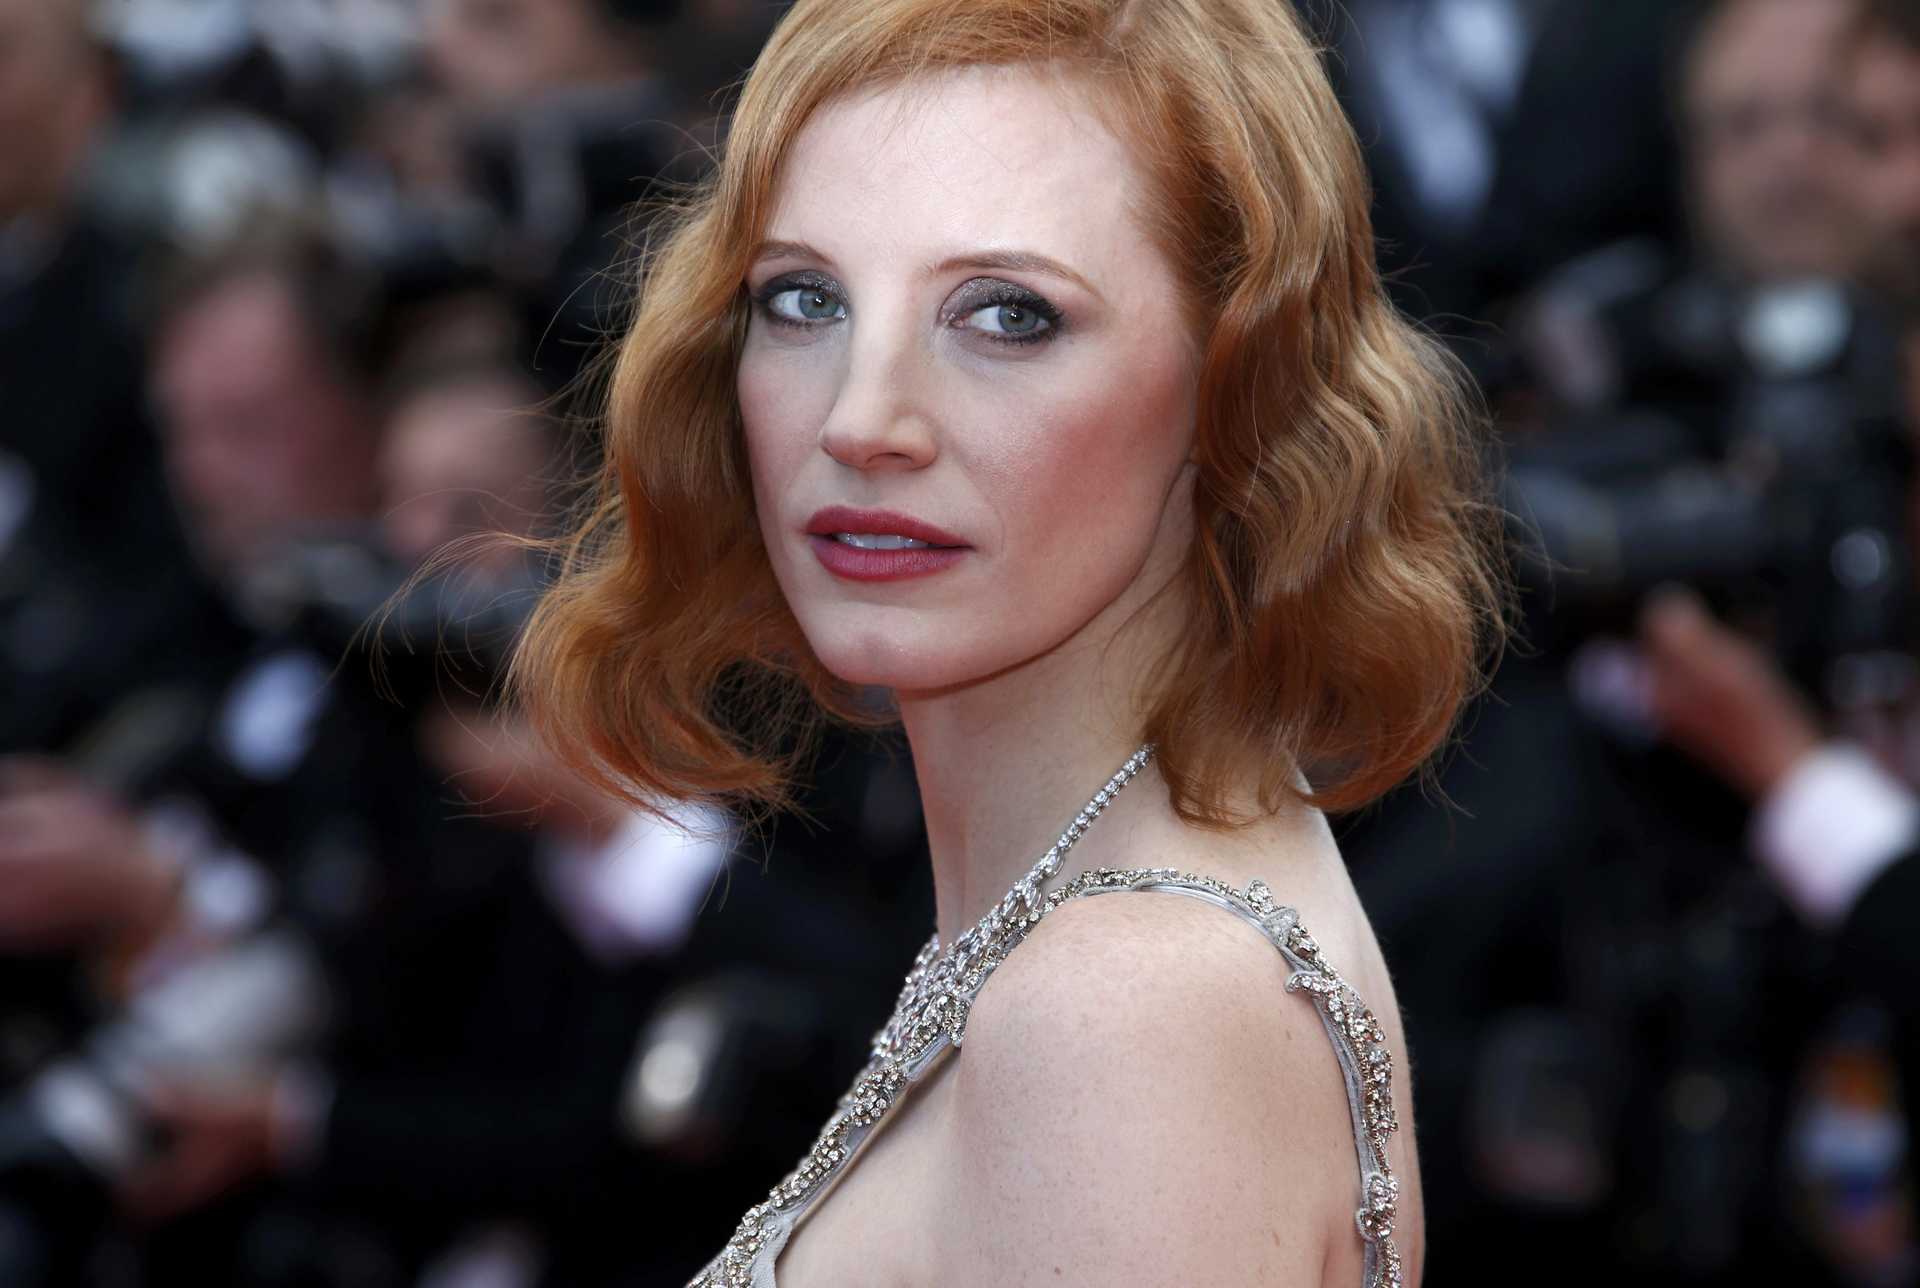 Actress Jessica Chastain poses on the red carpet as she arrives for the screening of the film “Money Monster” out of competition during the 69th Cannes Film Festival in Cannes